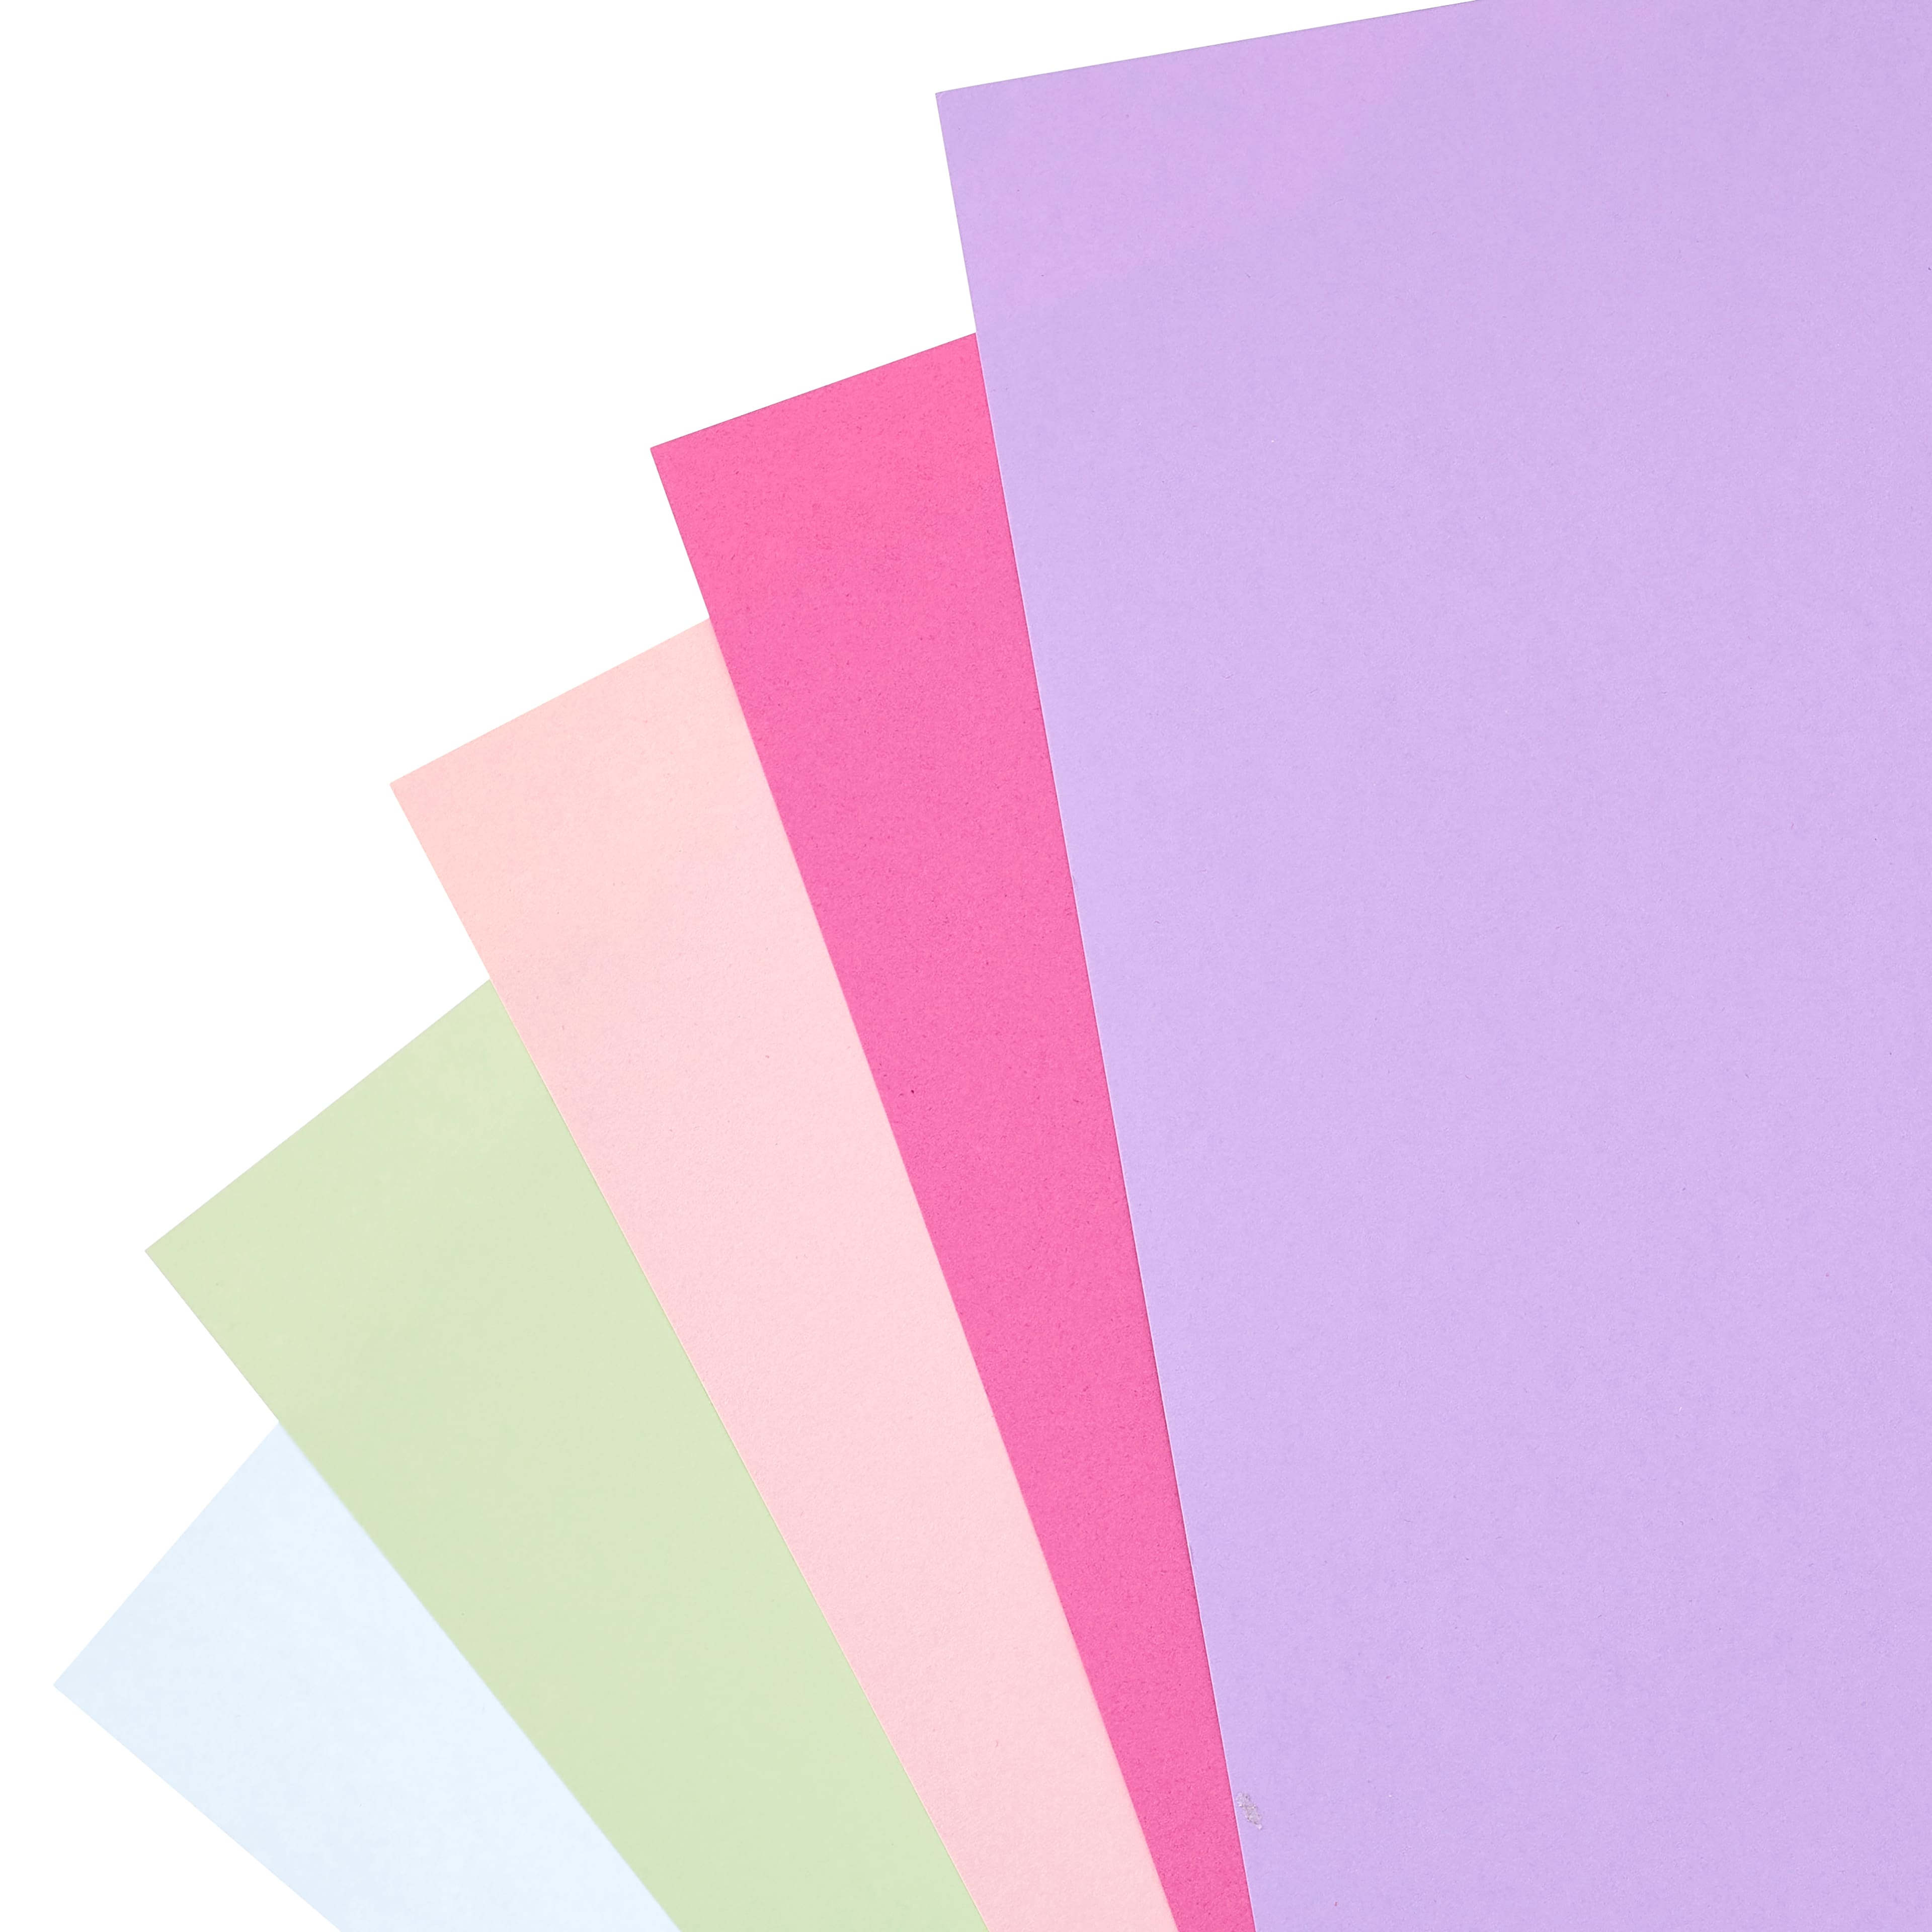 Soda Pop 8.5&#x22; x 11&#x22; Cardstock Paper by Recollections&#x2122;, 50 Sheets